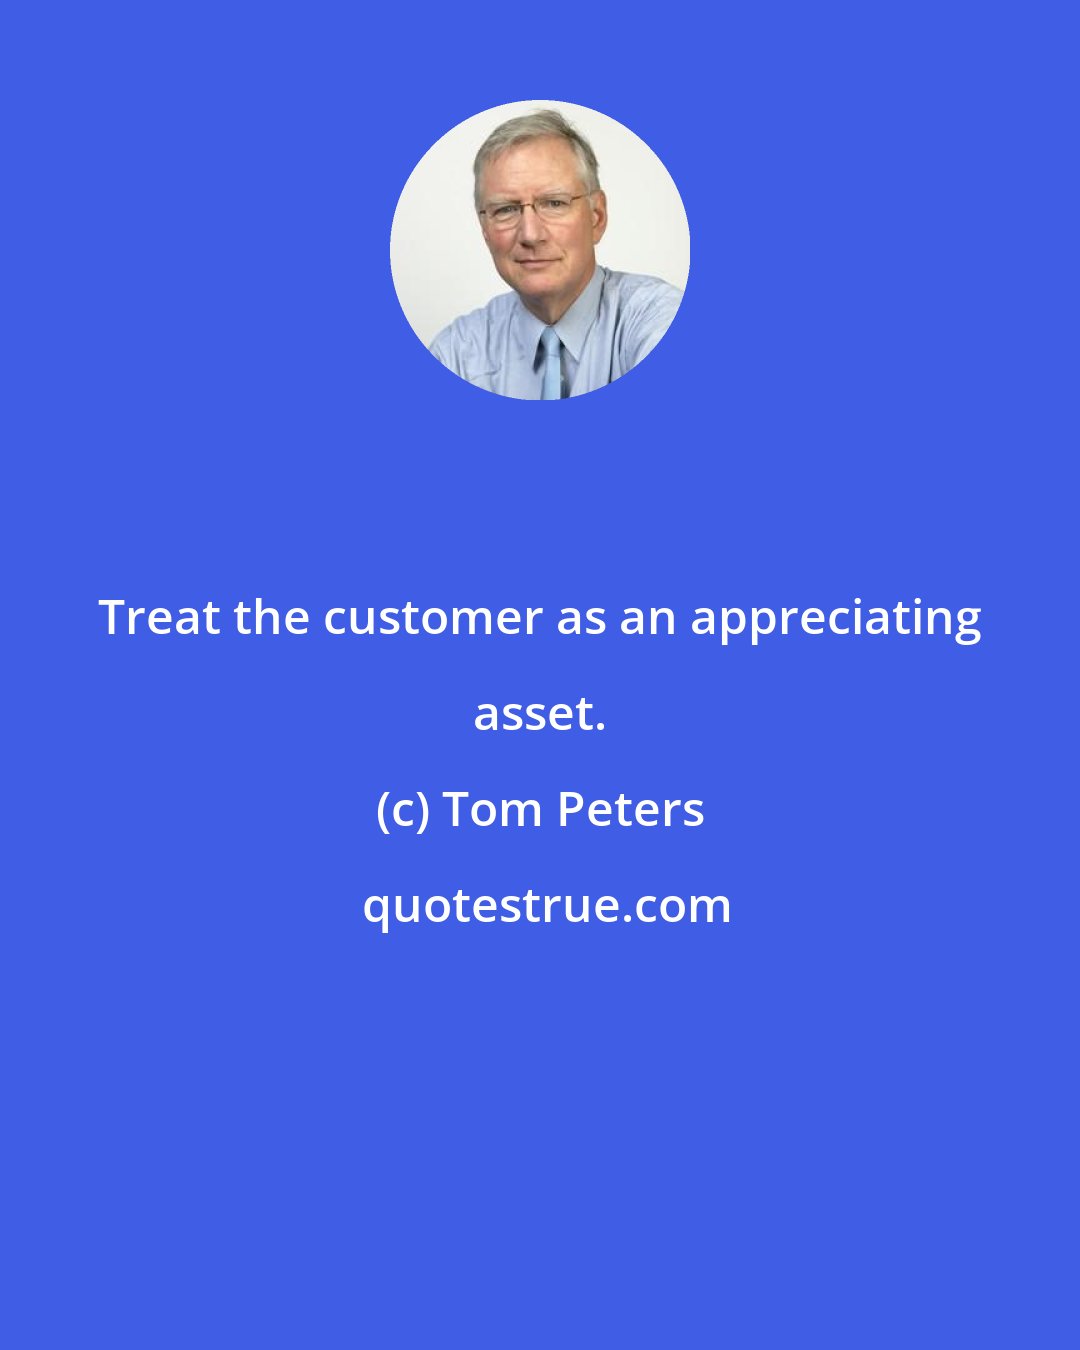 Tom Peters: Treat the customer as an appreciating asset.